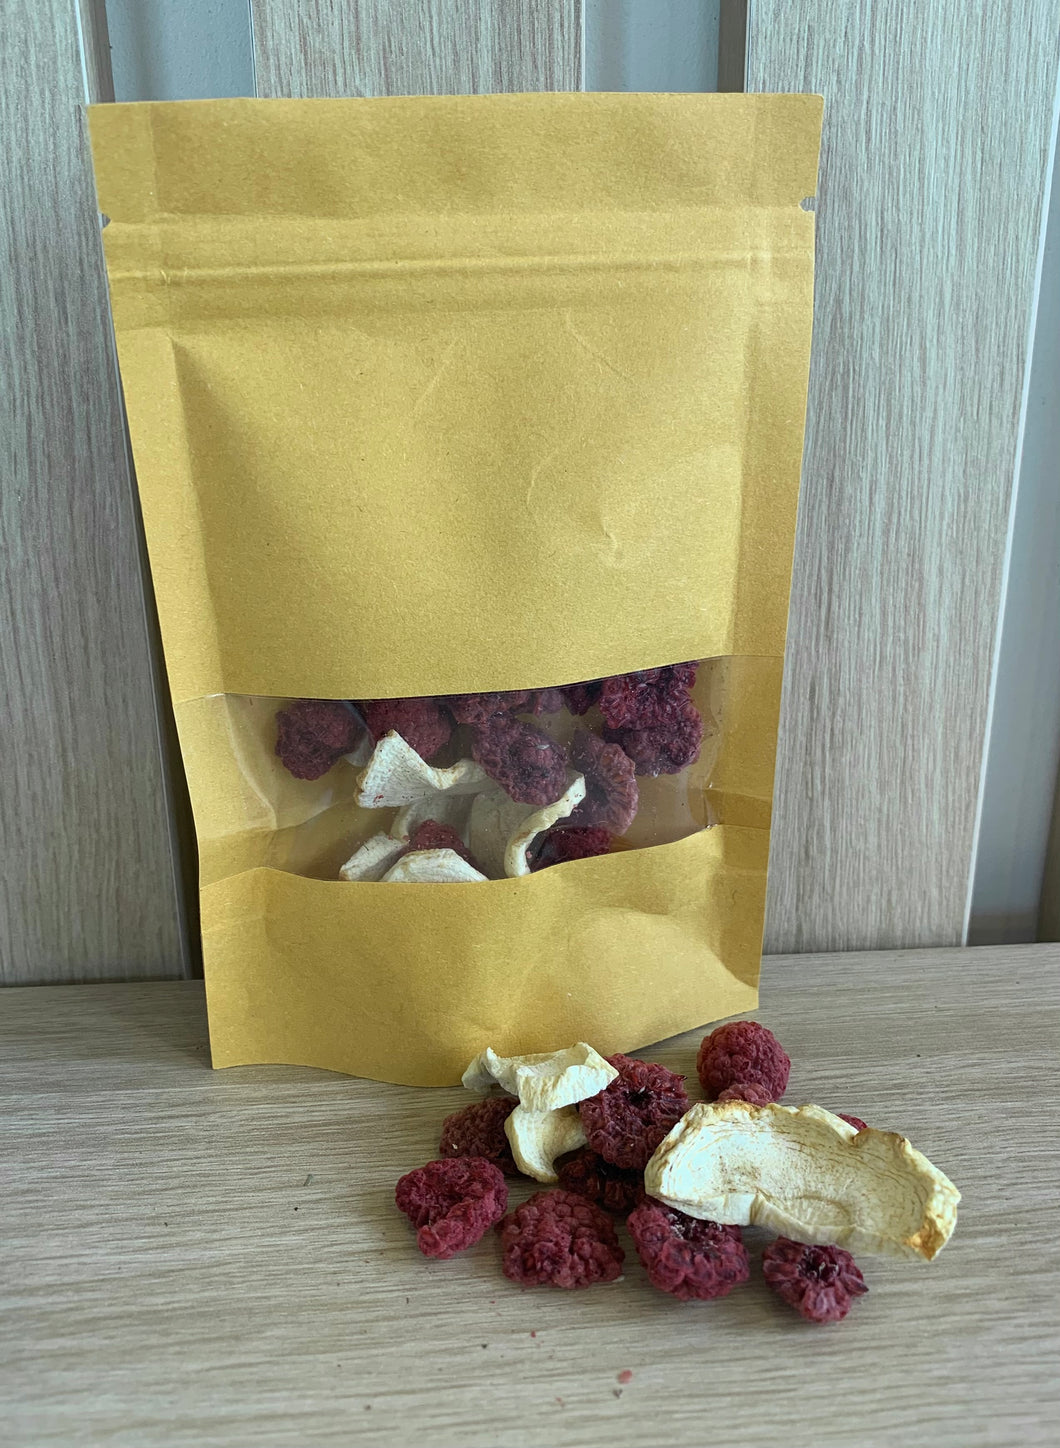 Dehydrated raspberries and parsnips - ALSA